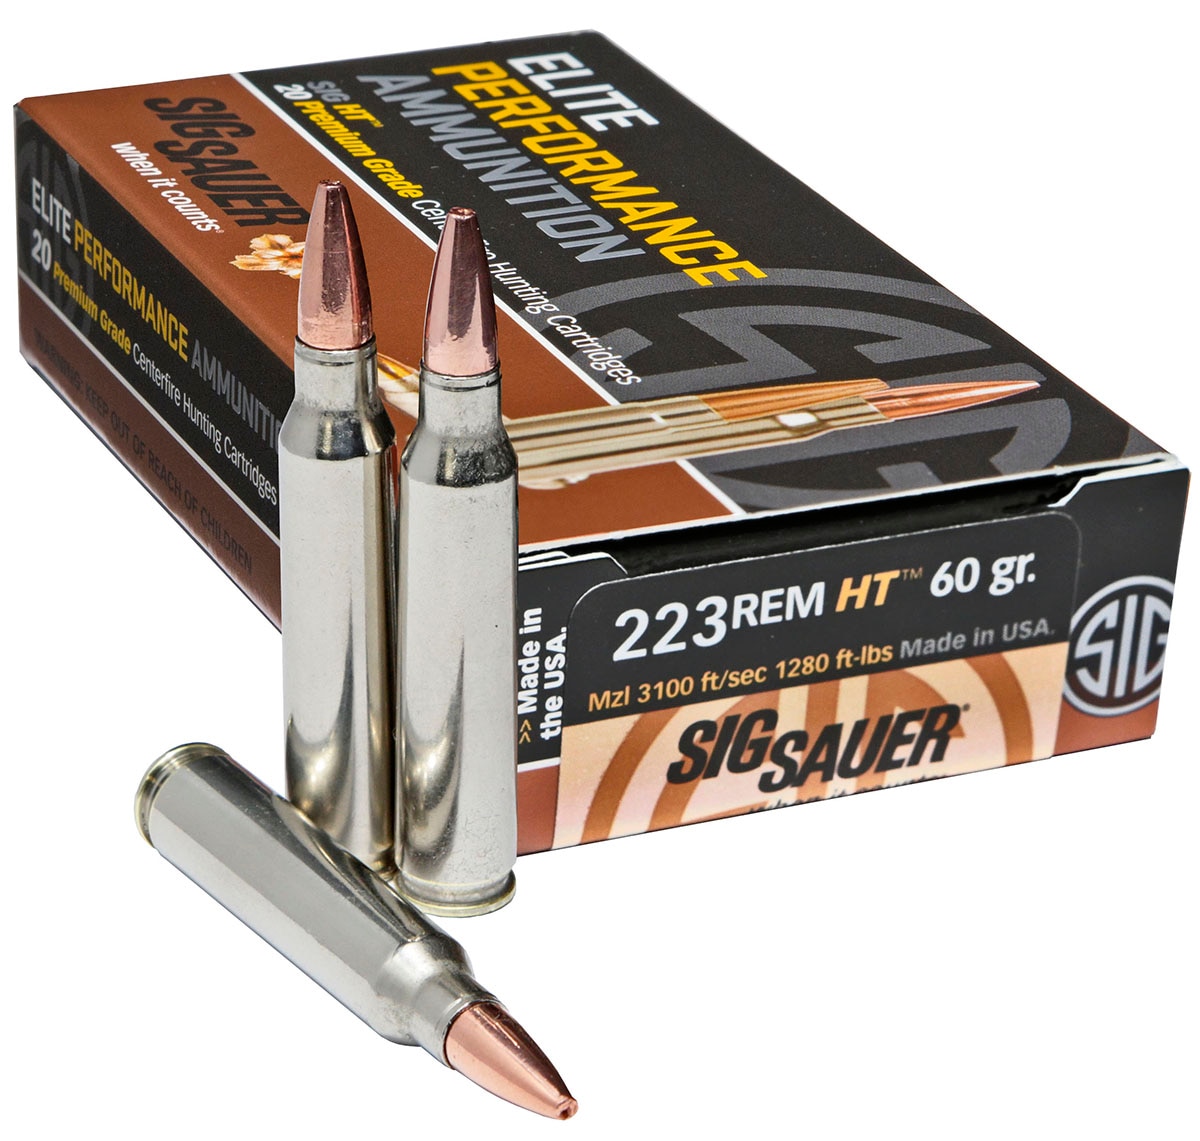 The .223 Rem. round joins the .308 Win and 300 BLK on Sig's rifle ammunition line. (Photo: Sig Sauer)